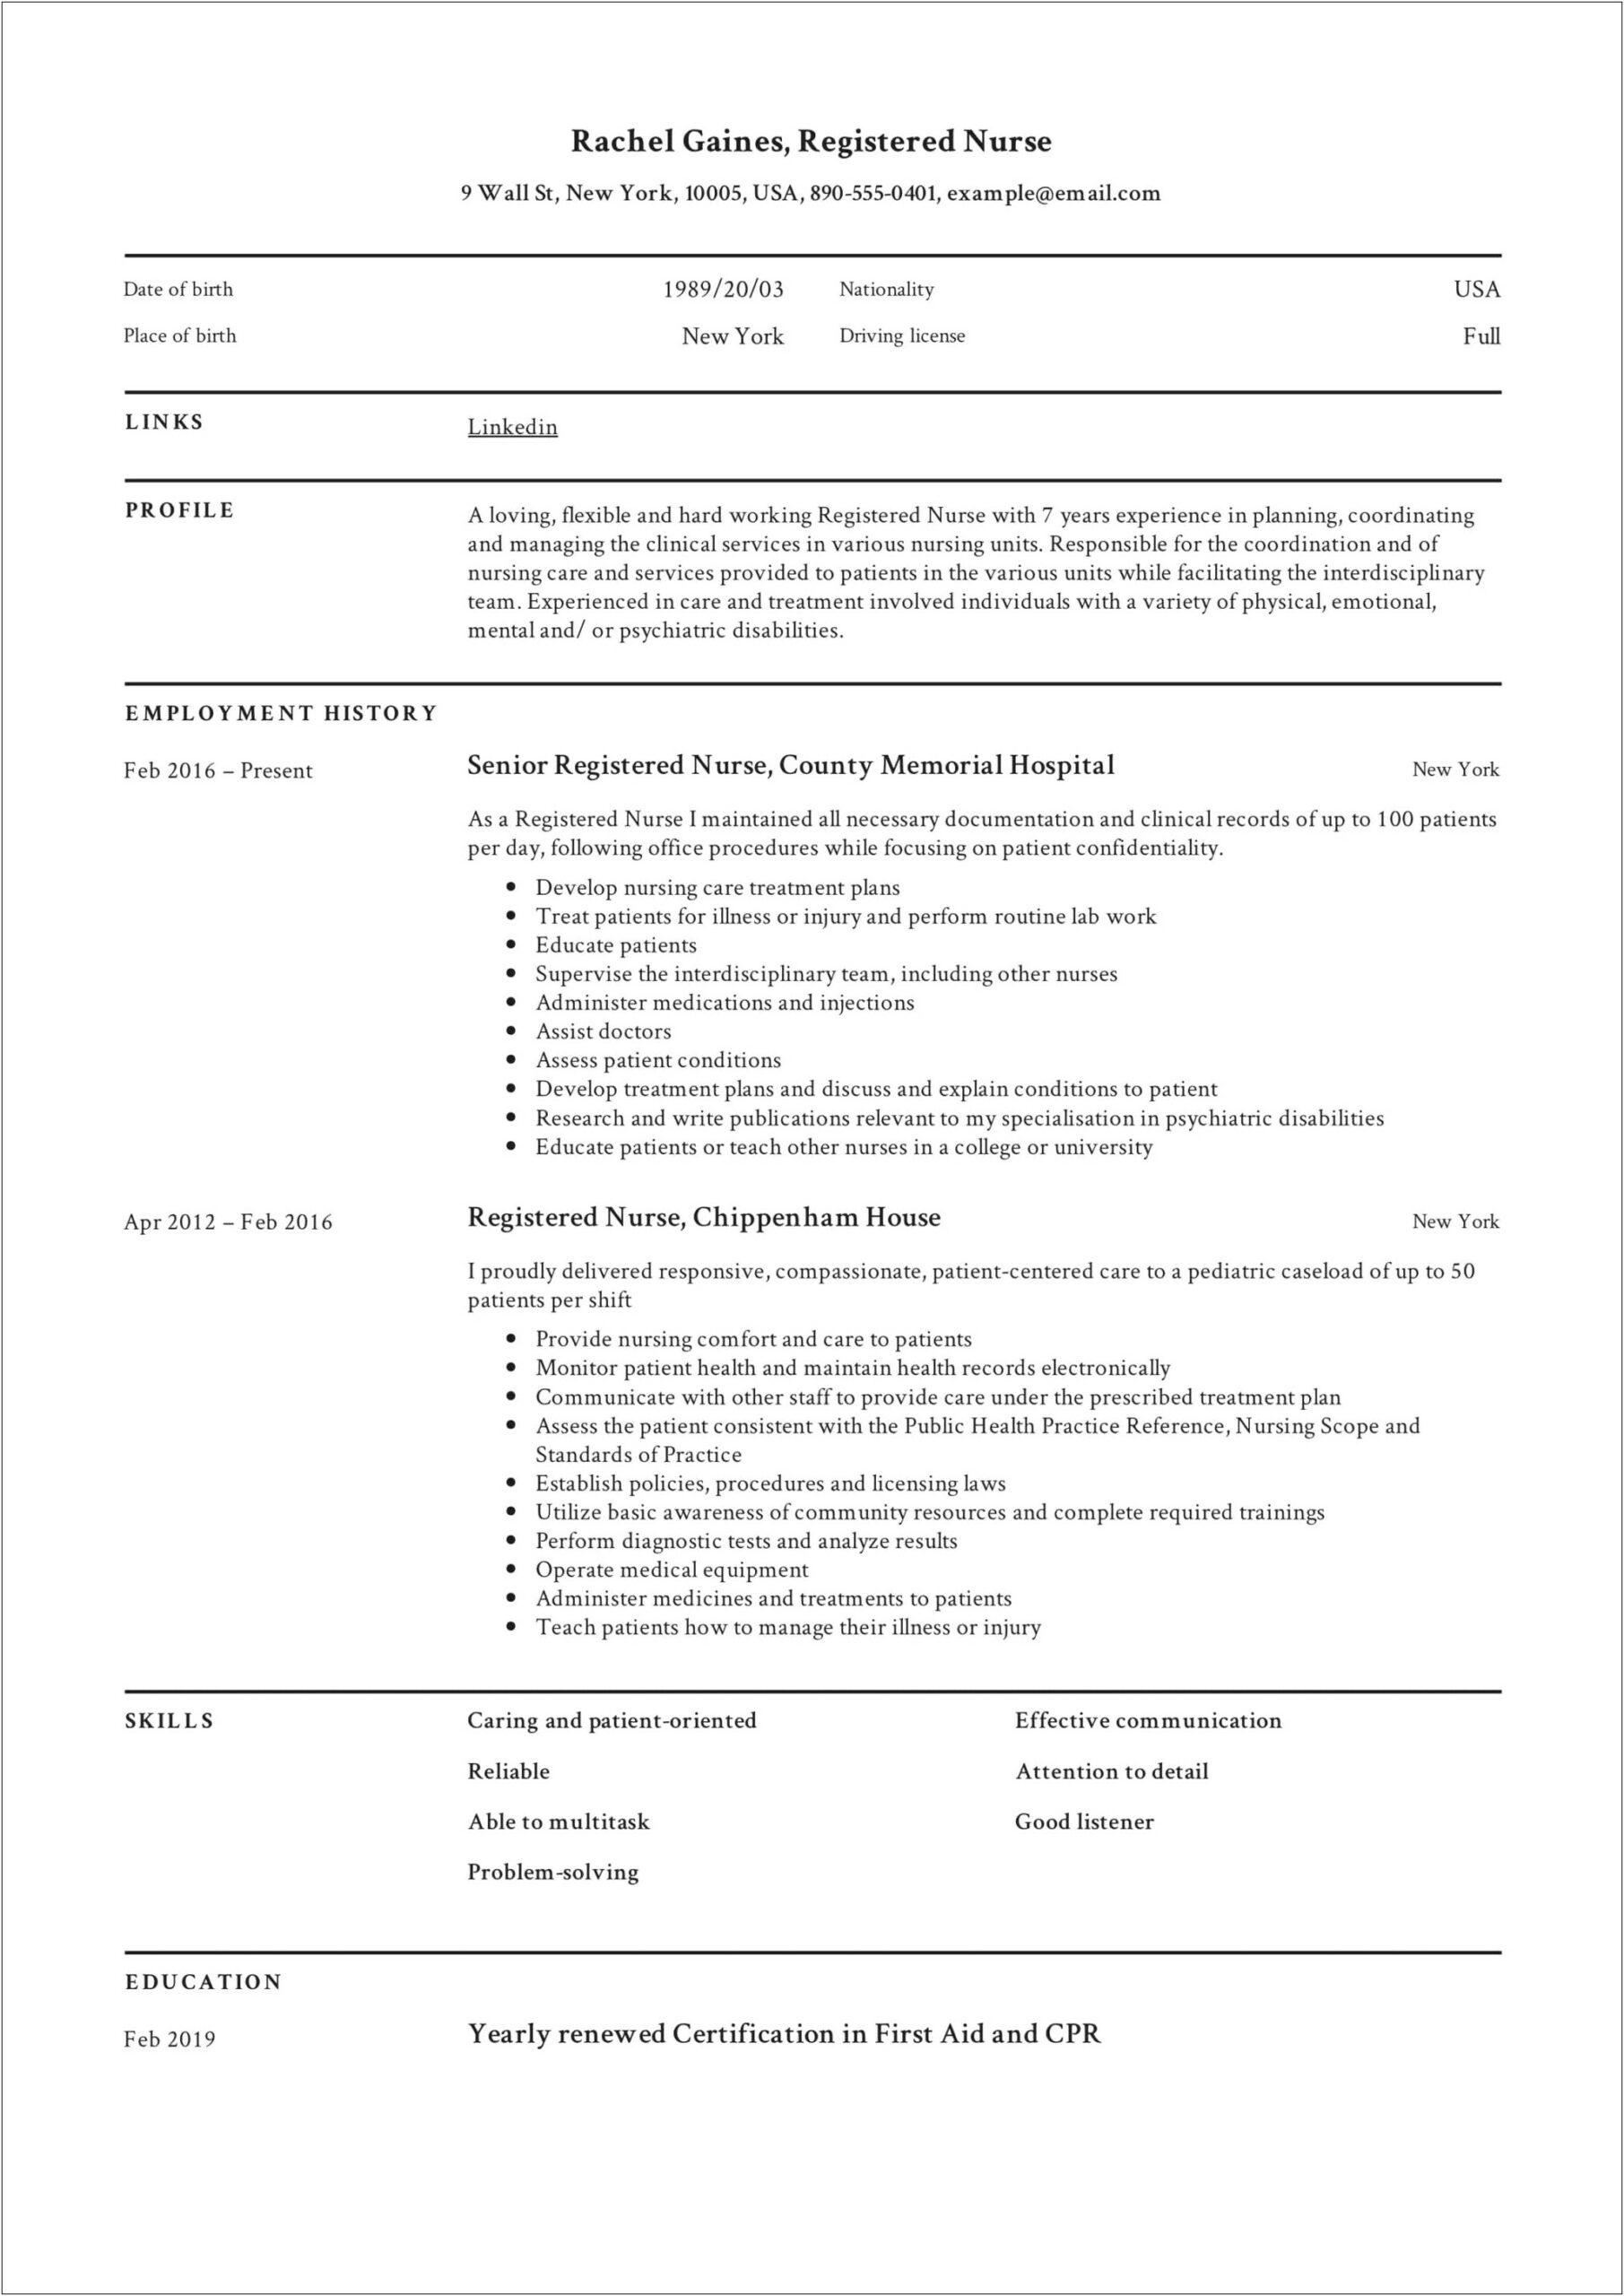 Resume Sample For Rn With No Experience 2019